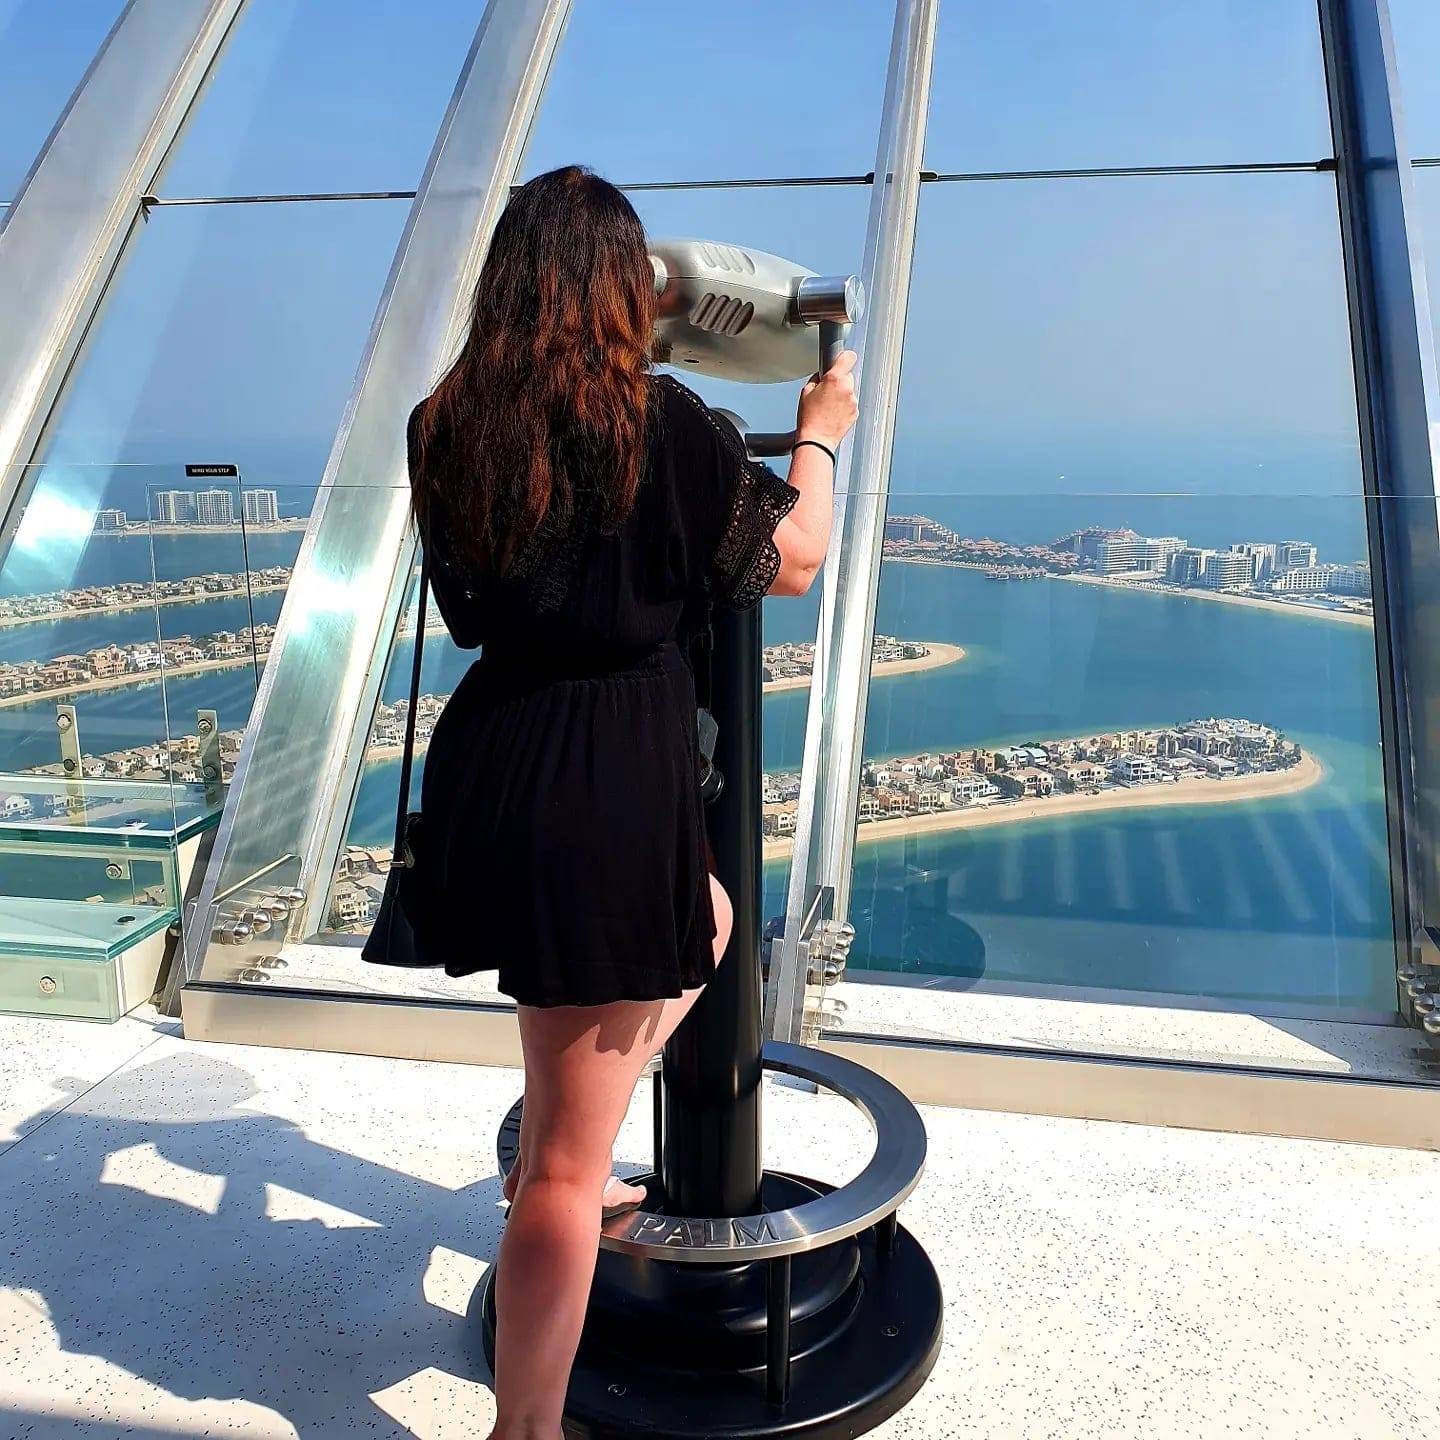 Me looking out over The Palm, Dubai